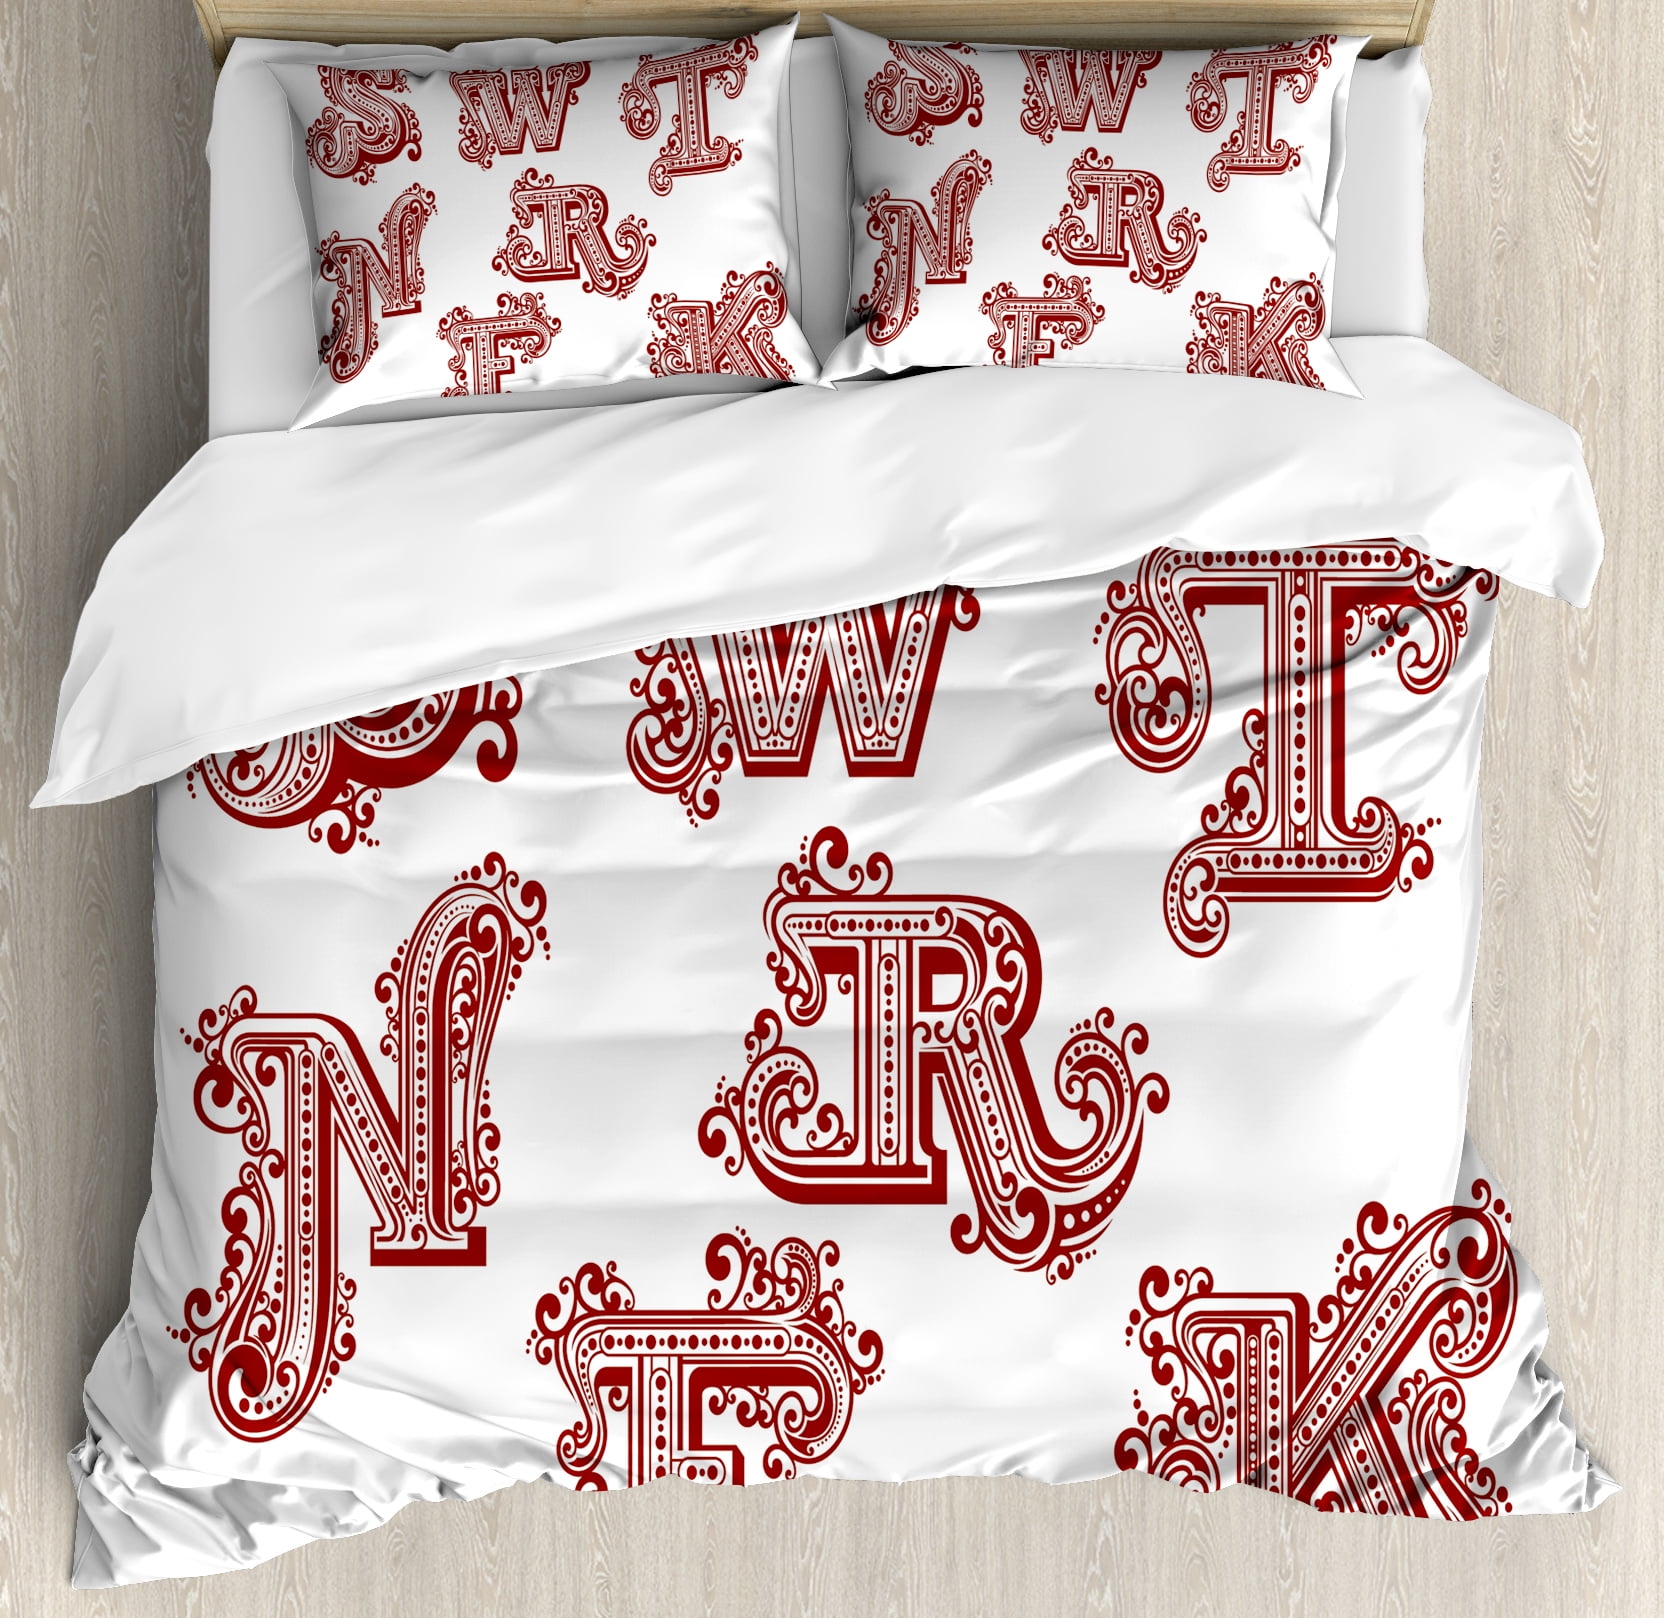 Letters Queen Size Duvet Cover Set Uppercase Letters In Vintage Swirly Style Ornate With